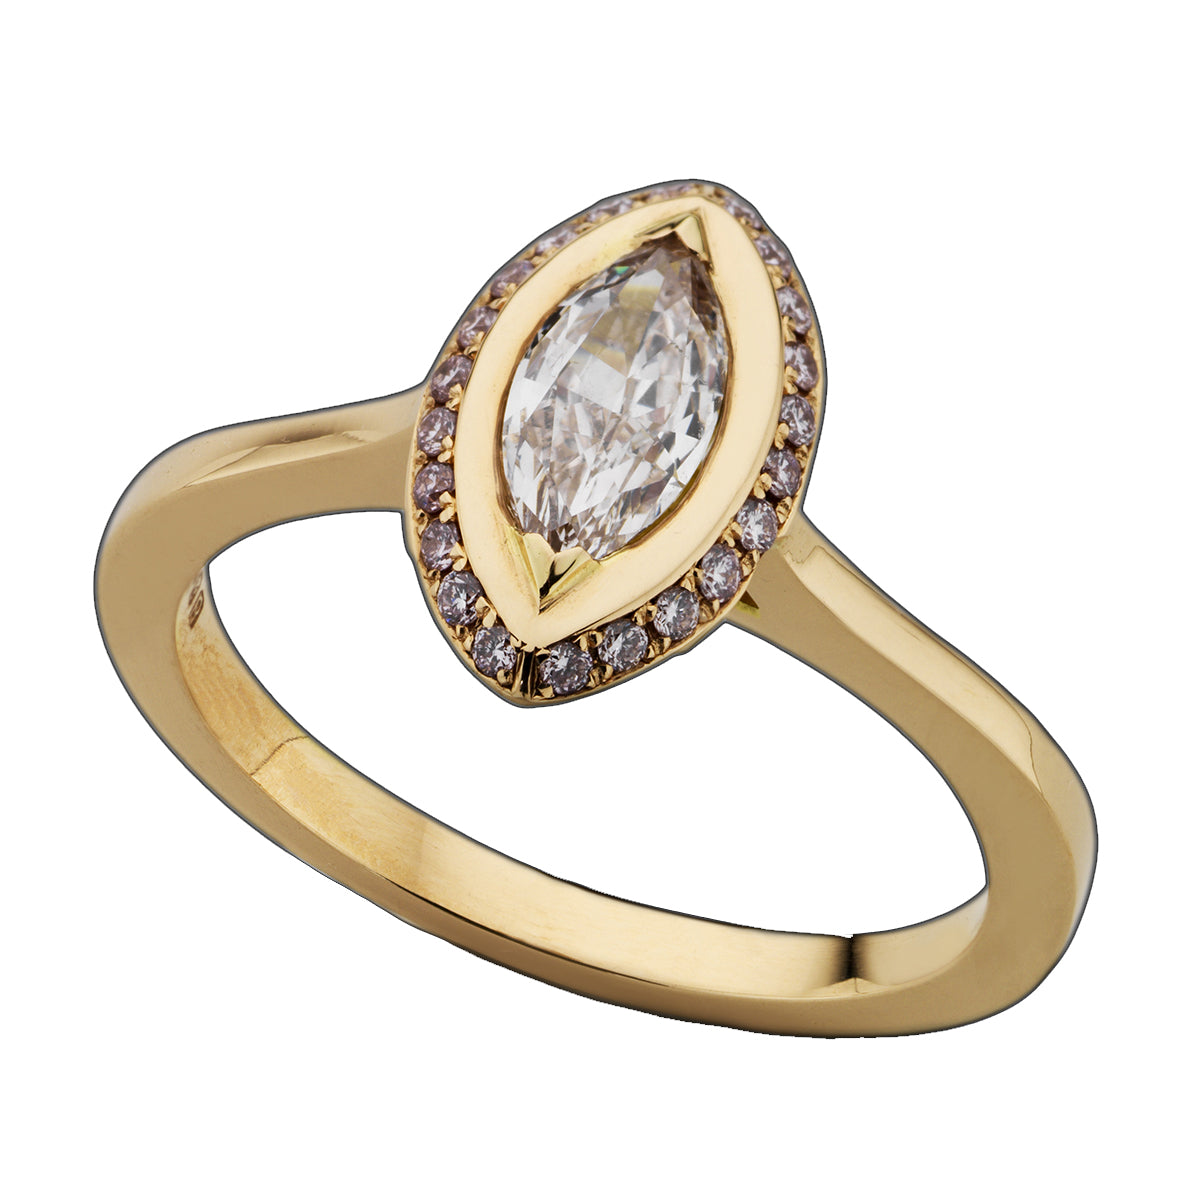 Marquise Fancy Brown/Pink Diamond Ring